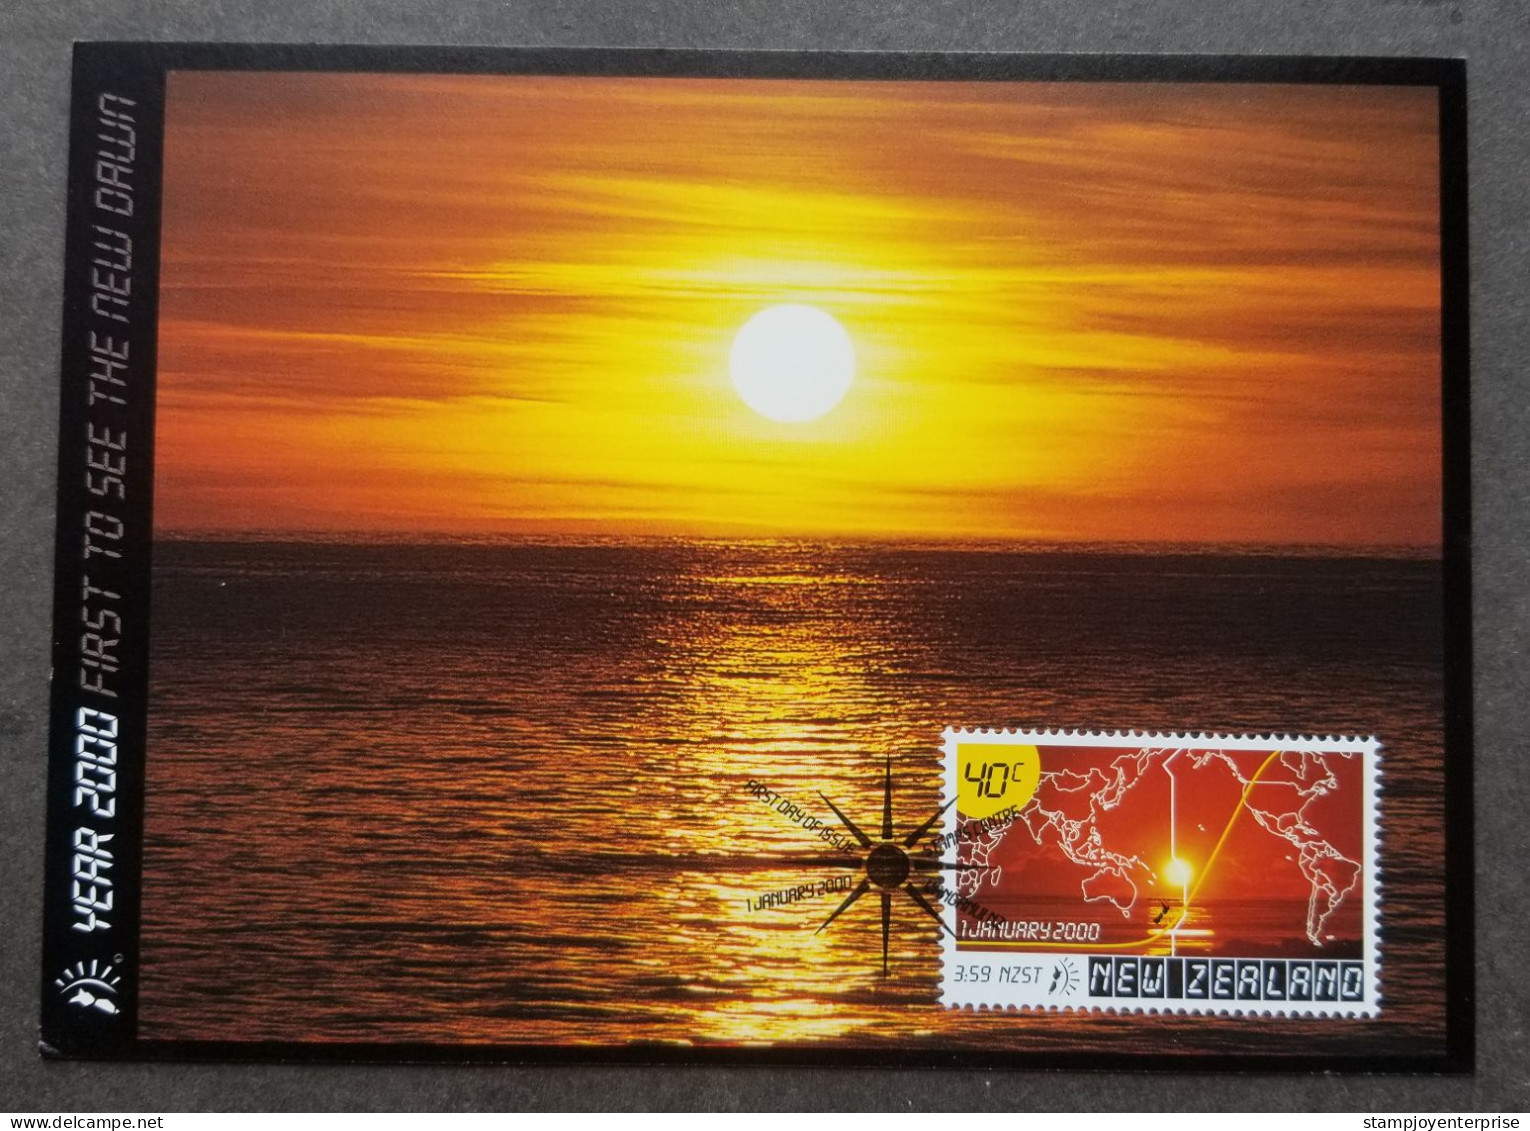 New Zealand First To See The New Dawn 2000 Millennium Map (maxicard) - Covers & Documents